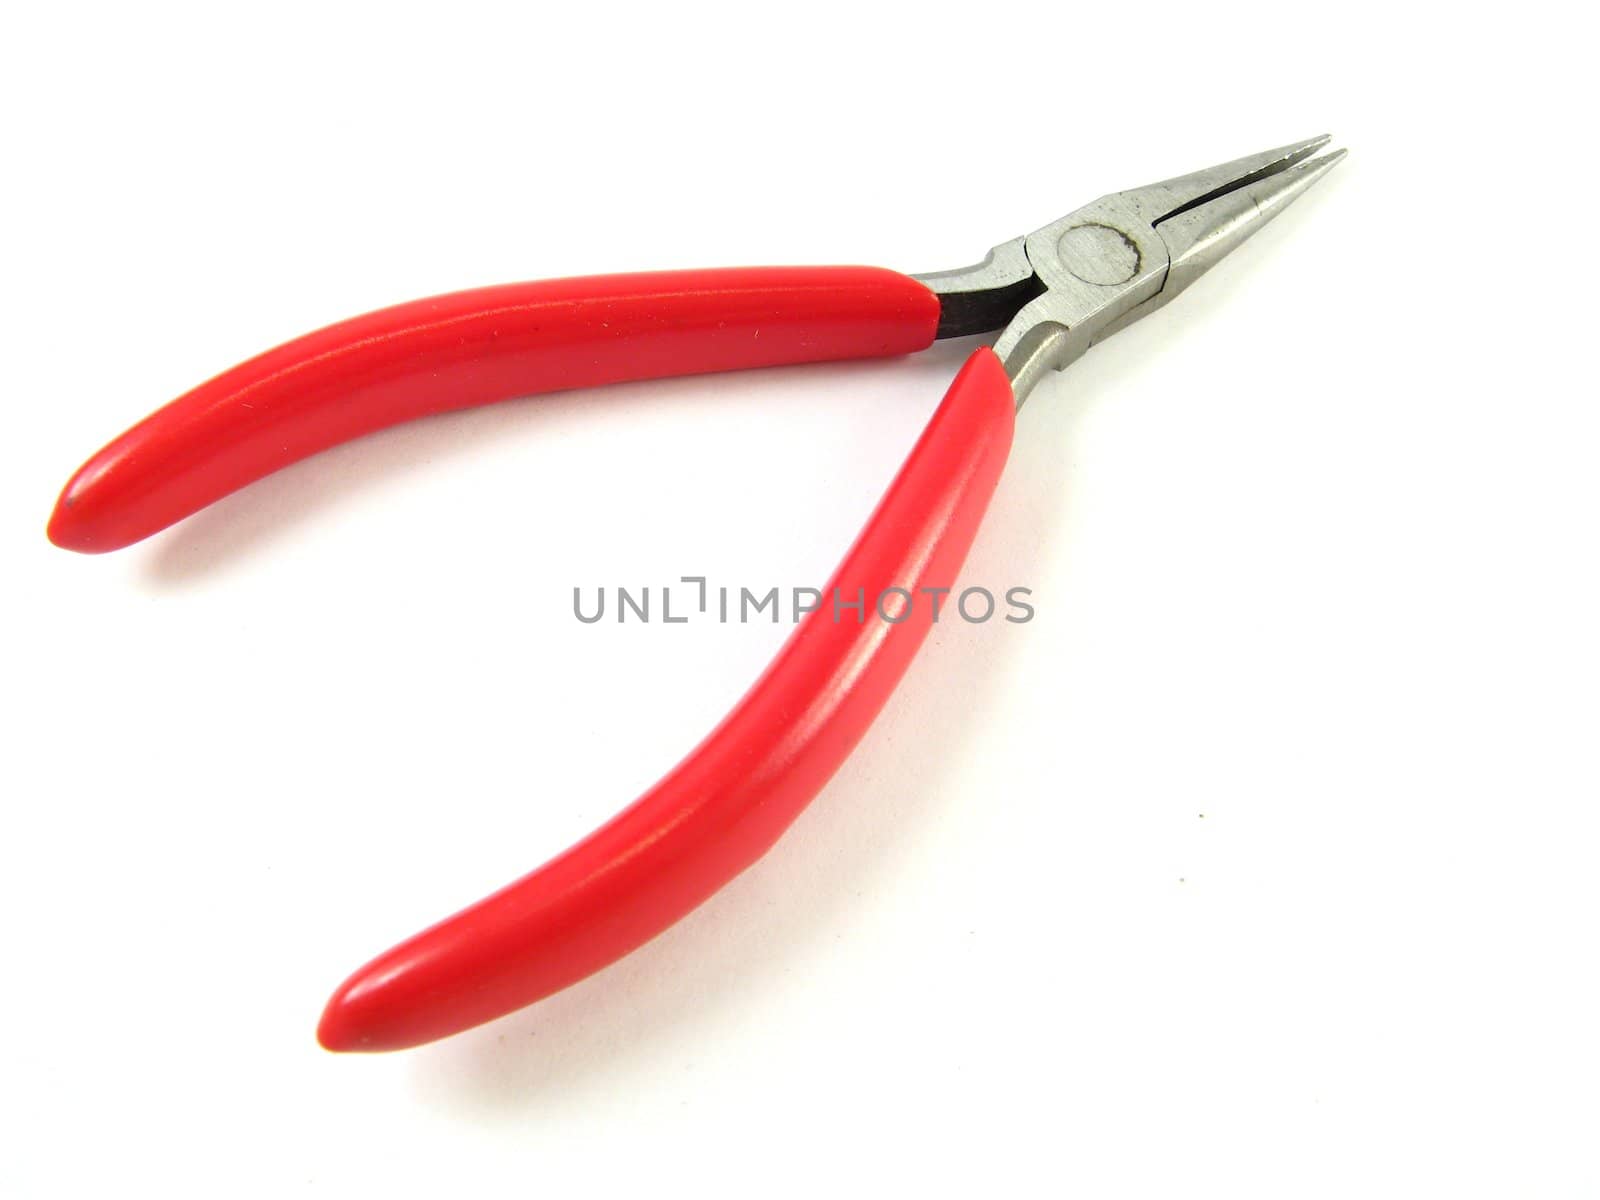 some red pliers over a white background